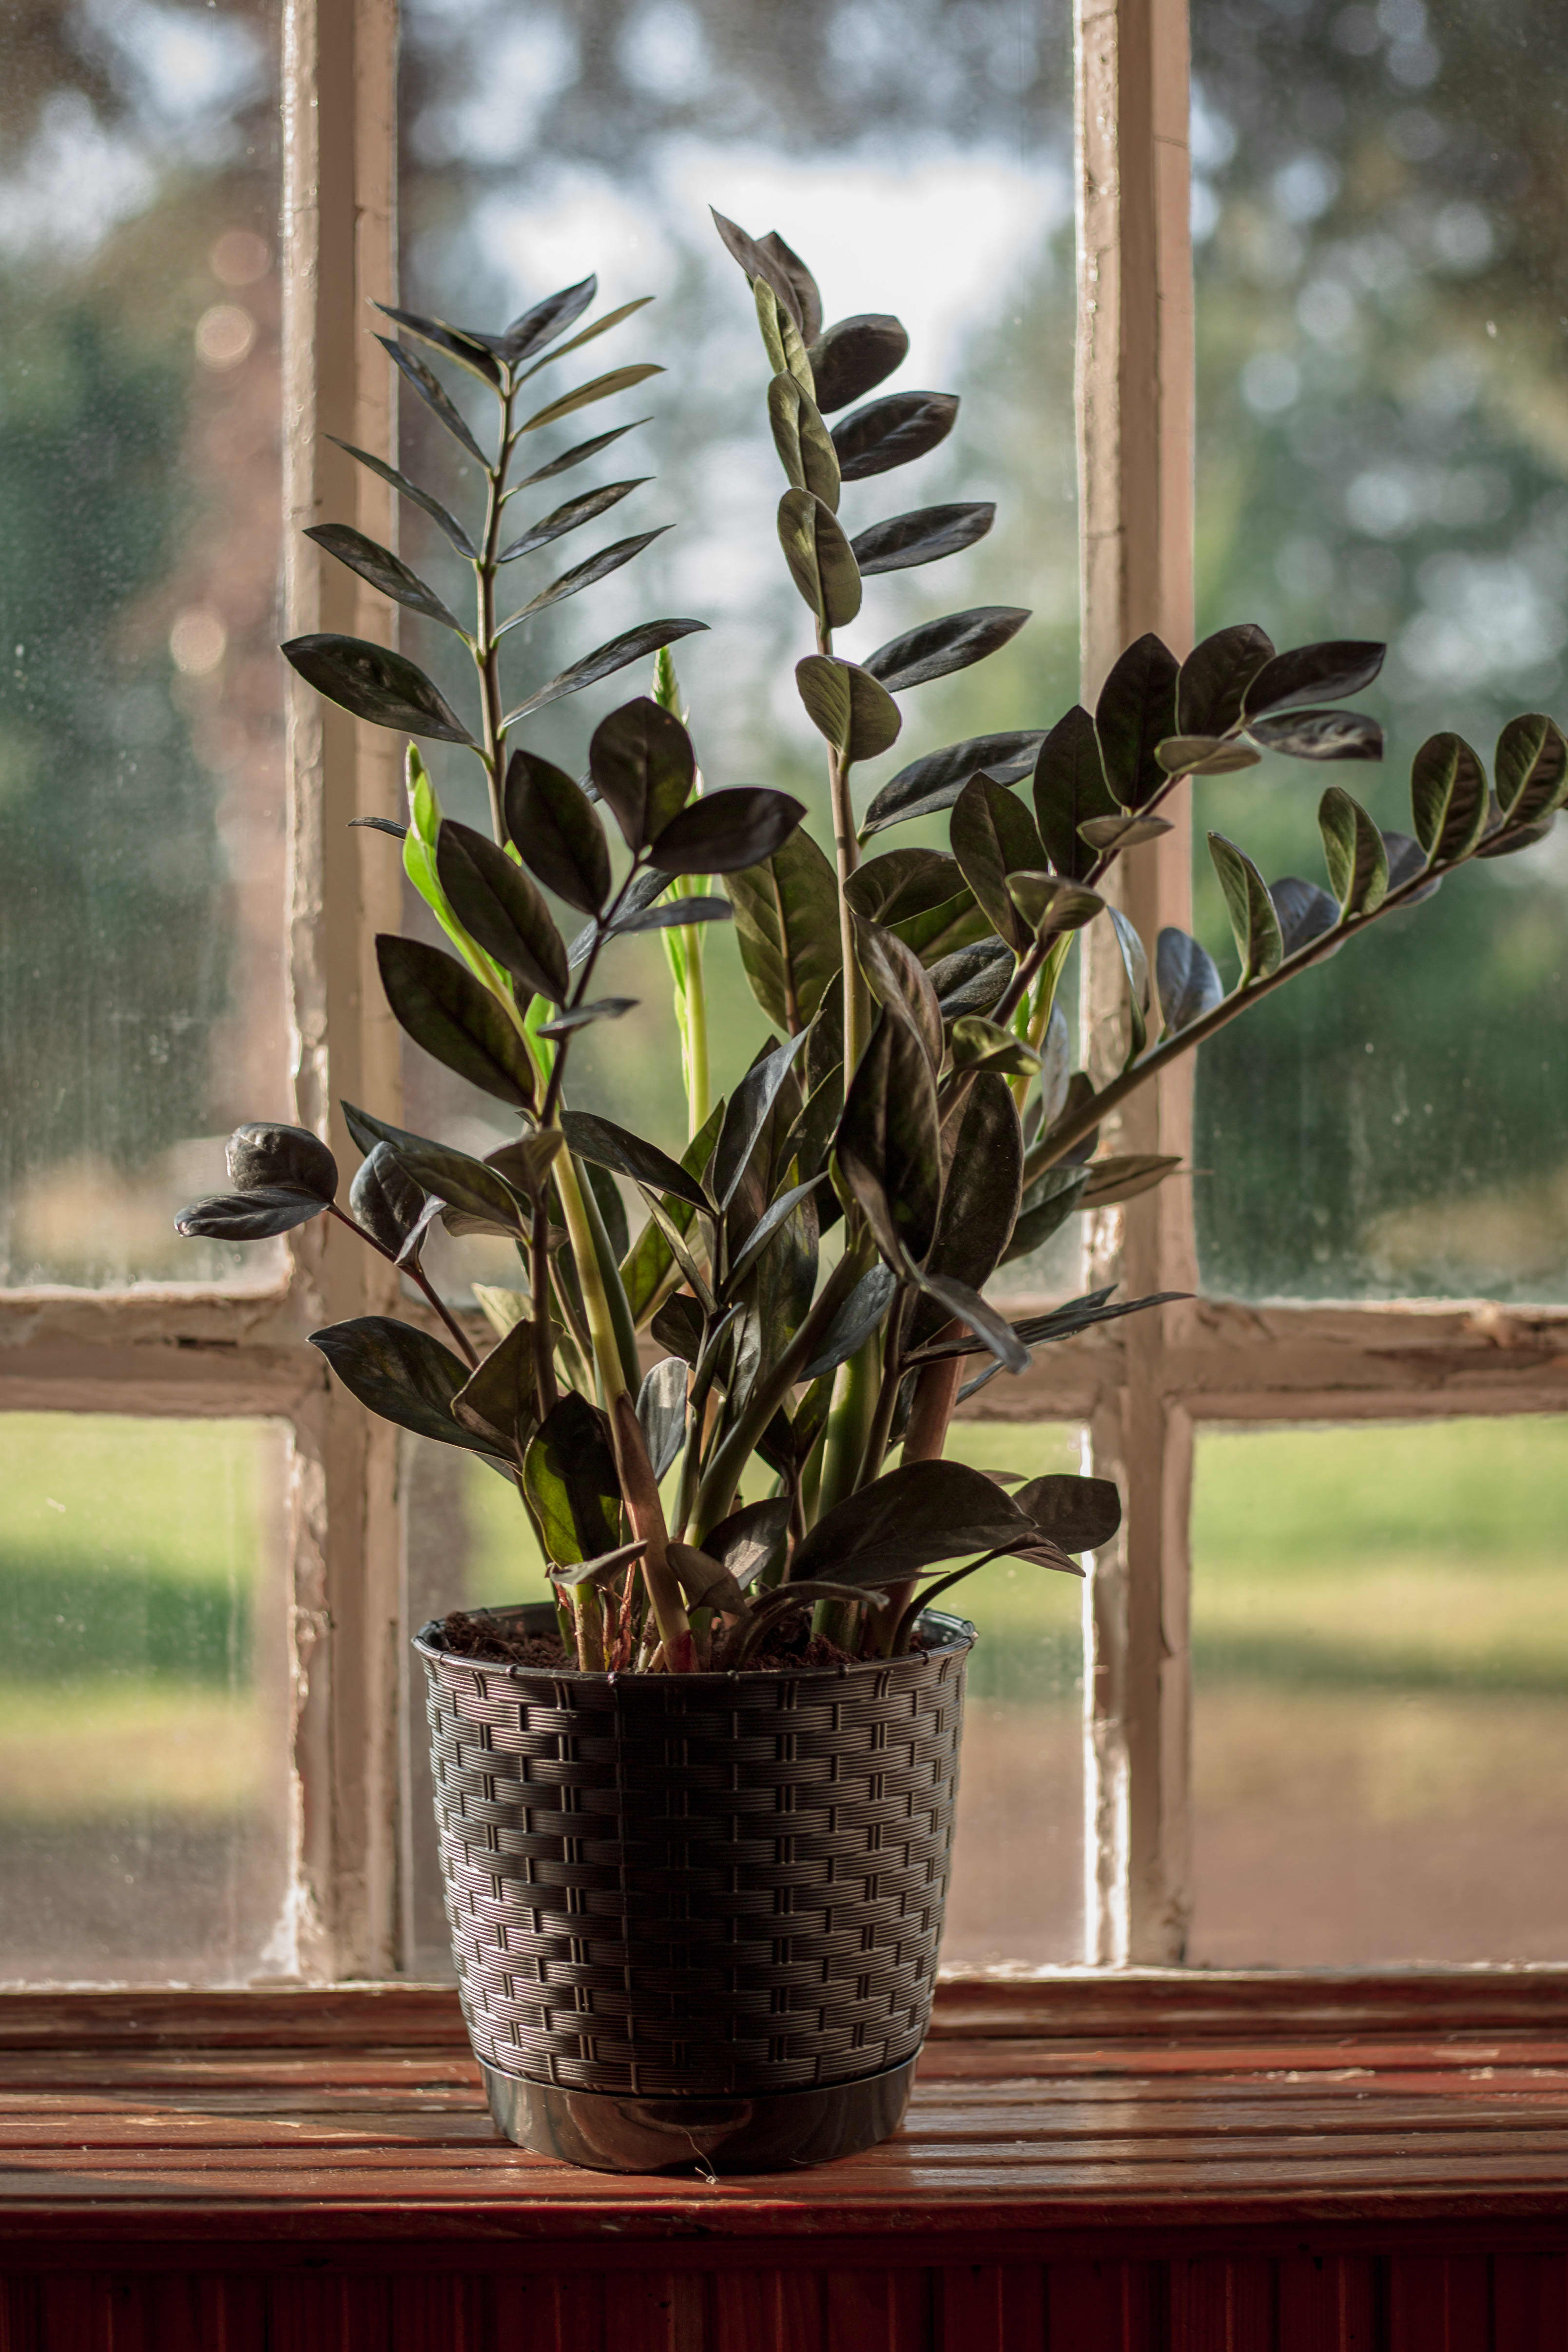 10 Plants Apartment Therapy